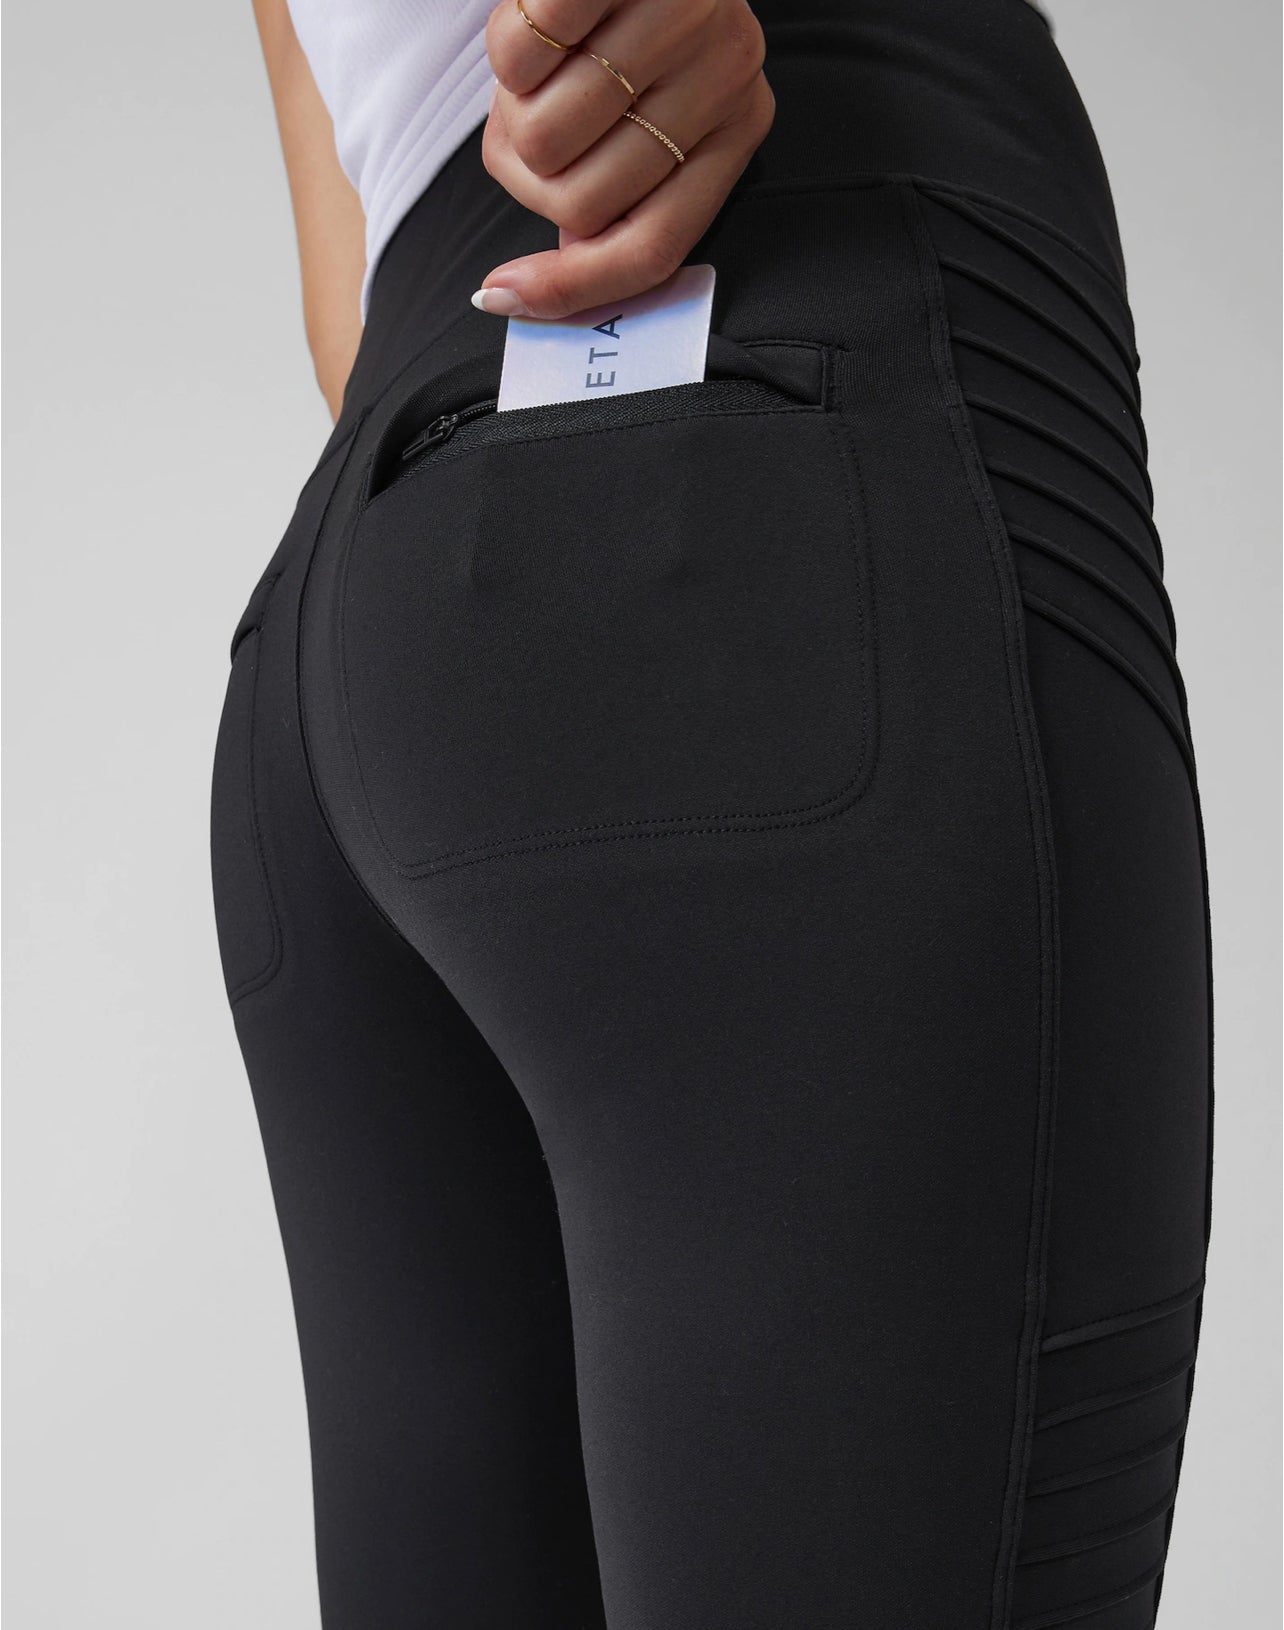 ad  Moto leggings are a must have! I've worn my @athleta Delancey